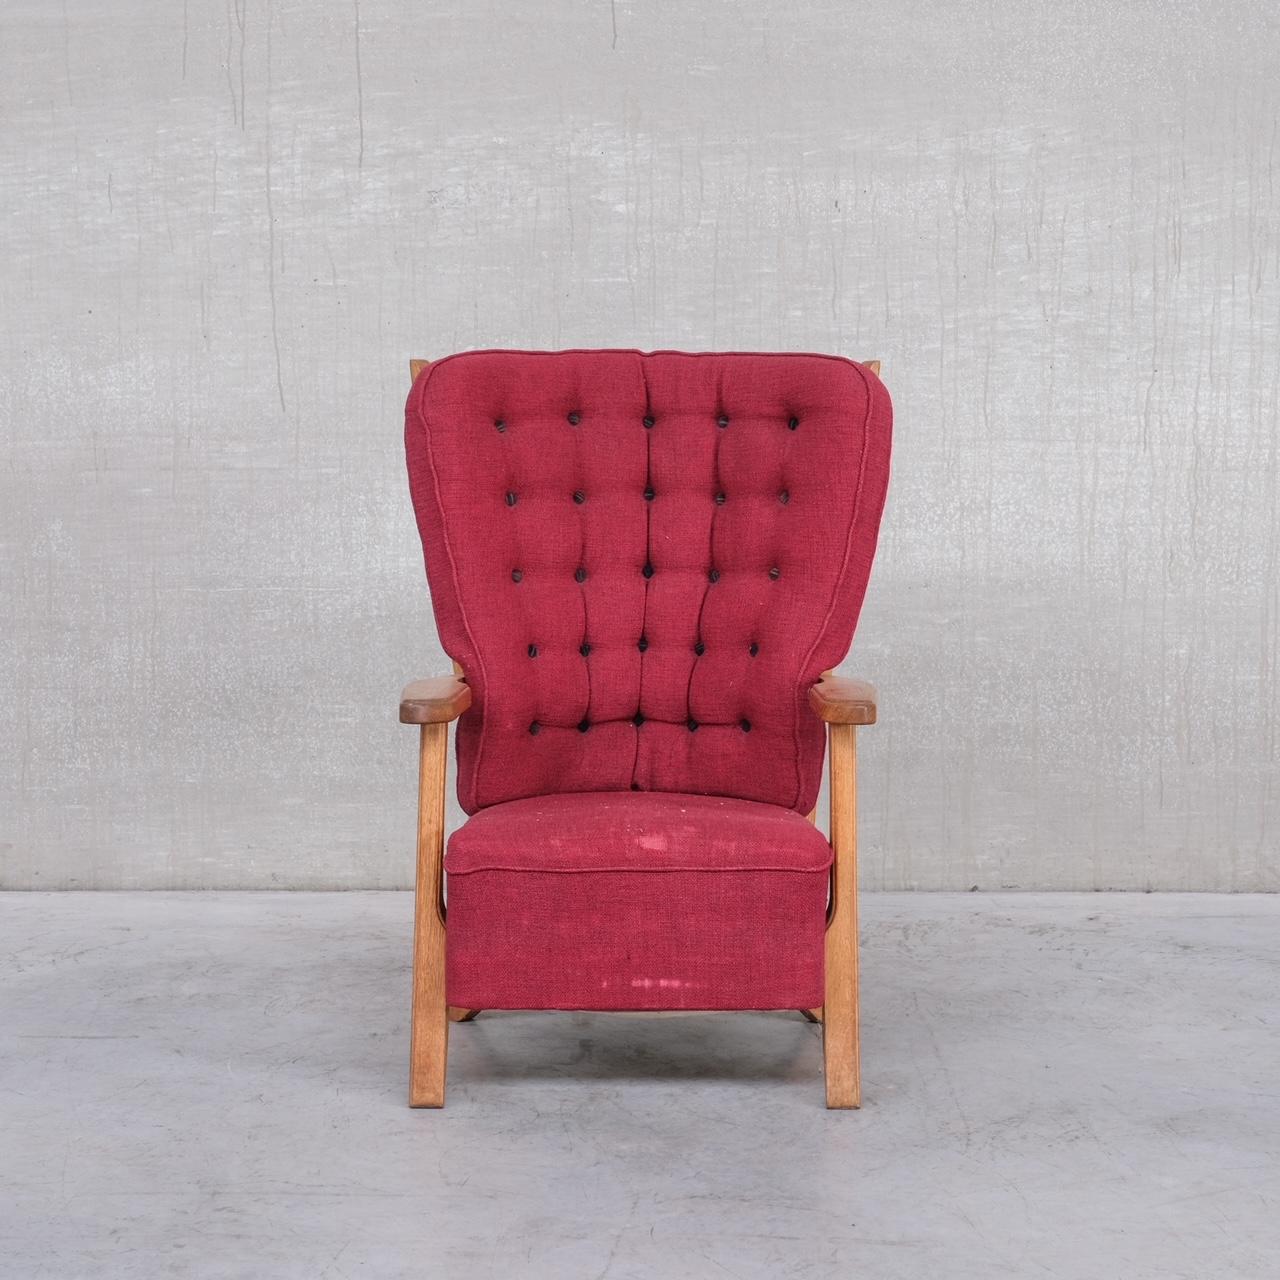 A petite mid-century armchair. 

France, c1960s. 

By Guillerme et Chambron. 

Original upholstery is worn so wants updating, priced accordingly, which allows a fabric and style to be chosen. 

Location: Belgium Gallery. 

Dimensions: 70 W